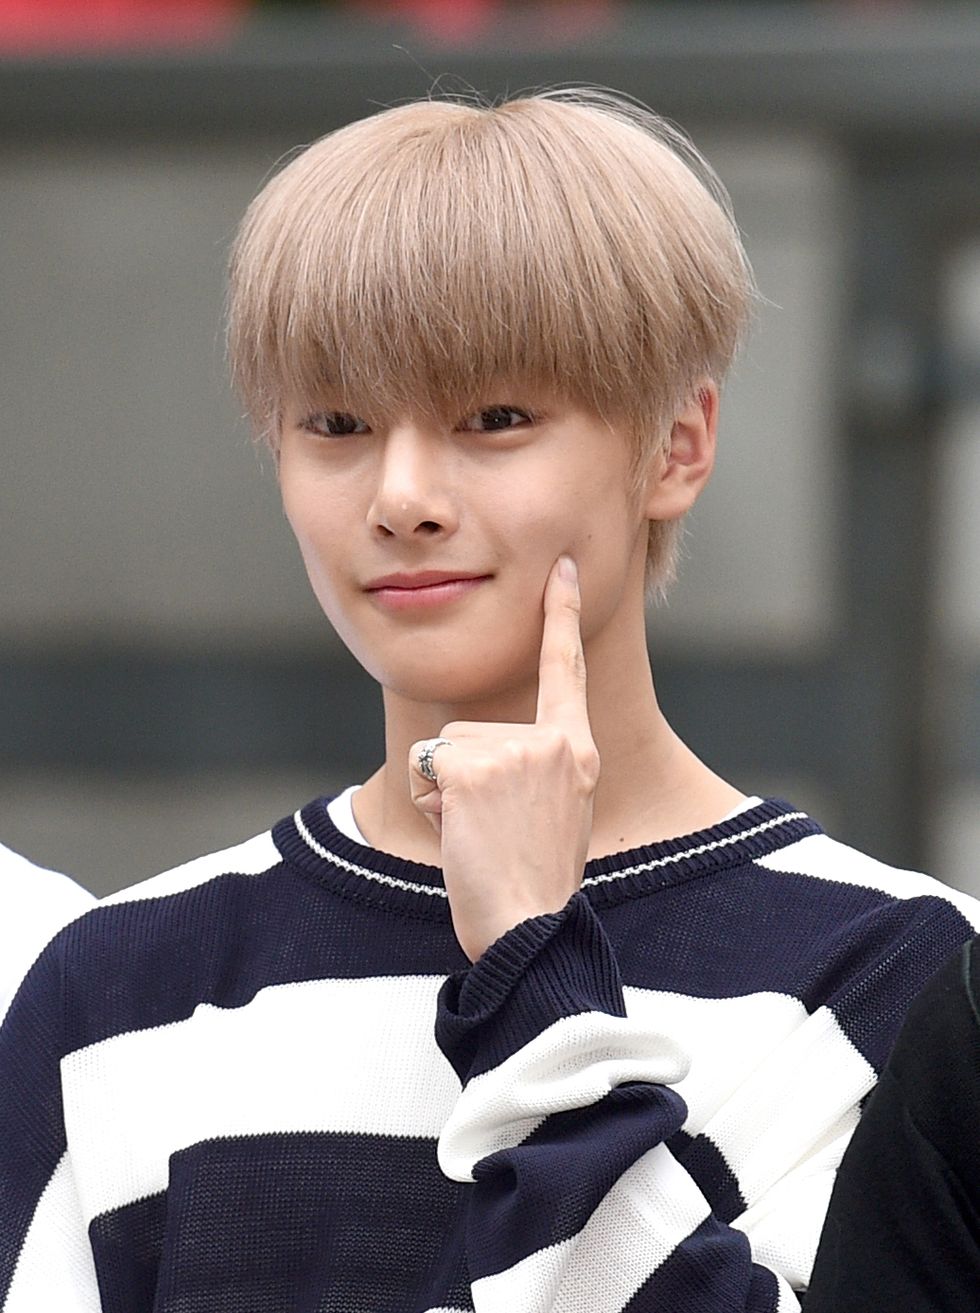 in of stray kids arrived to rehearsal for kbss music bank on june 21, 2019 in seoul, south korea 2019 06 21